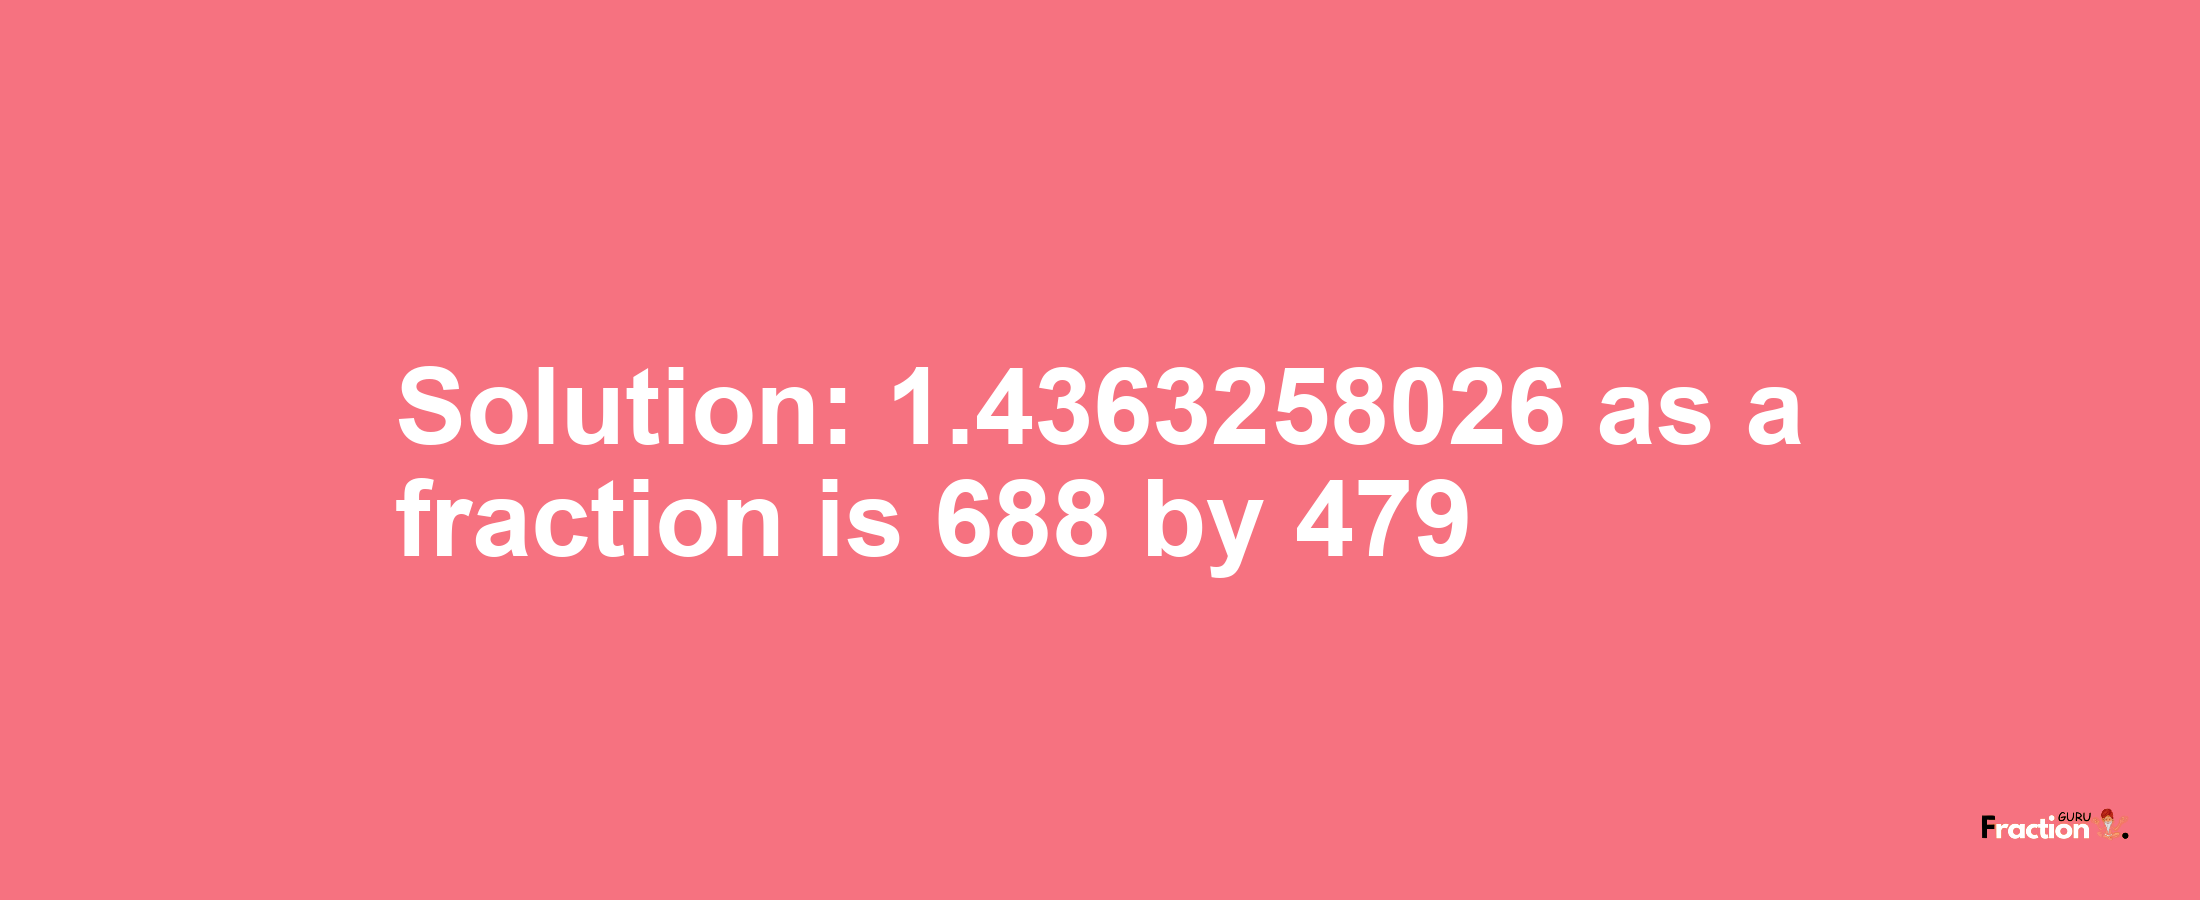 Solution:1.4363258026 as a fraction is 688/479